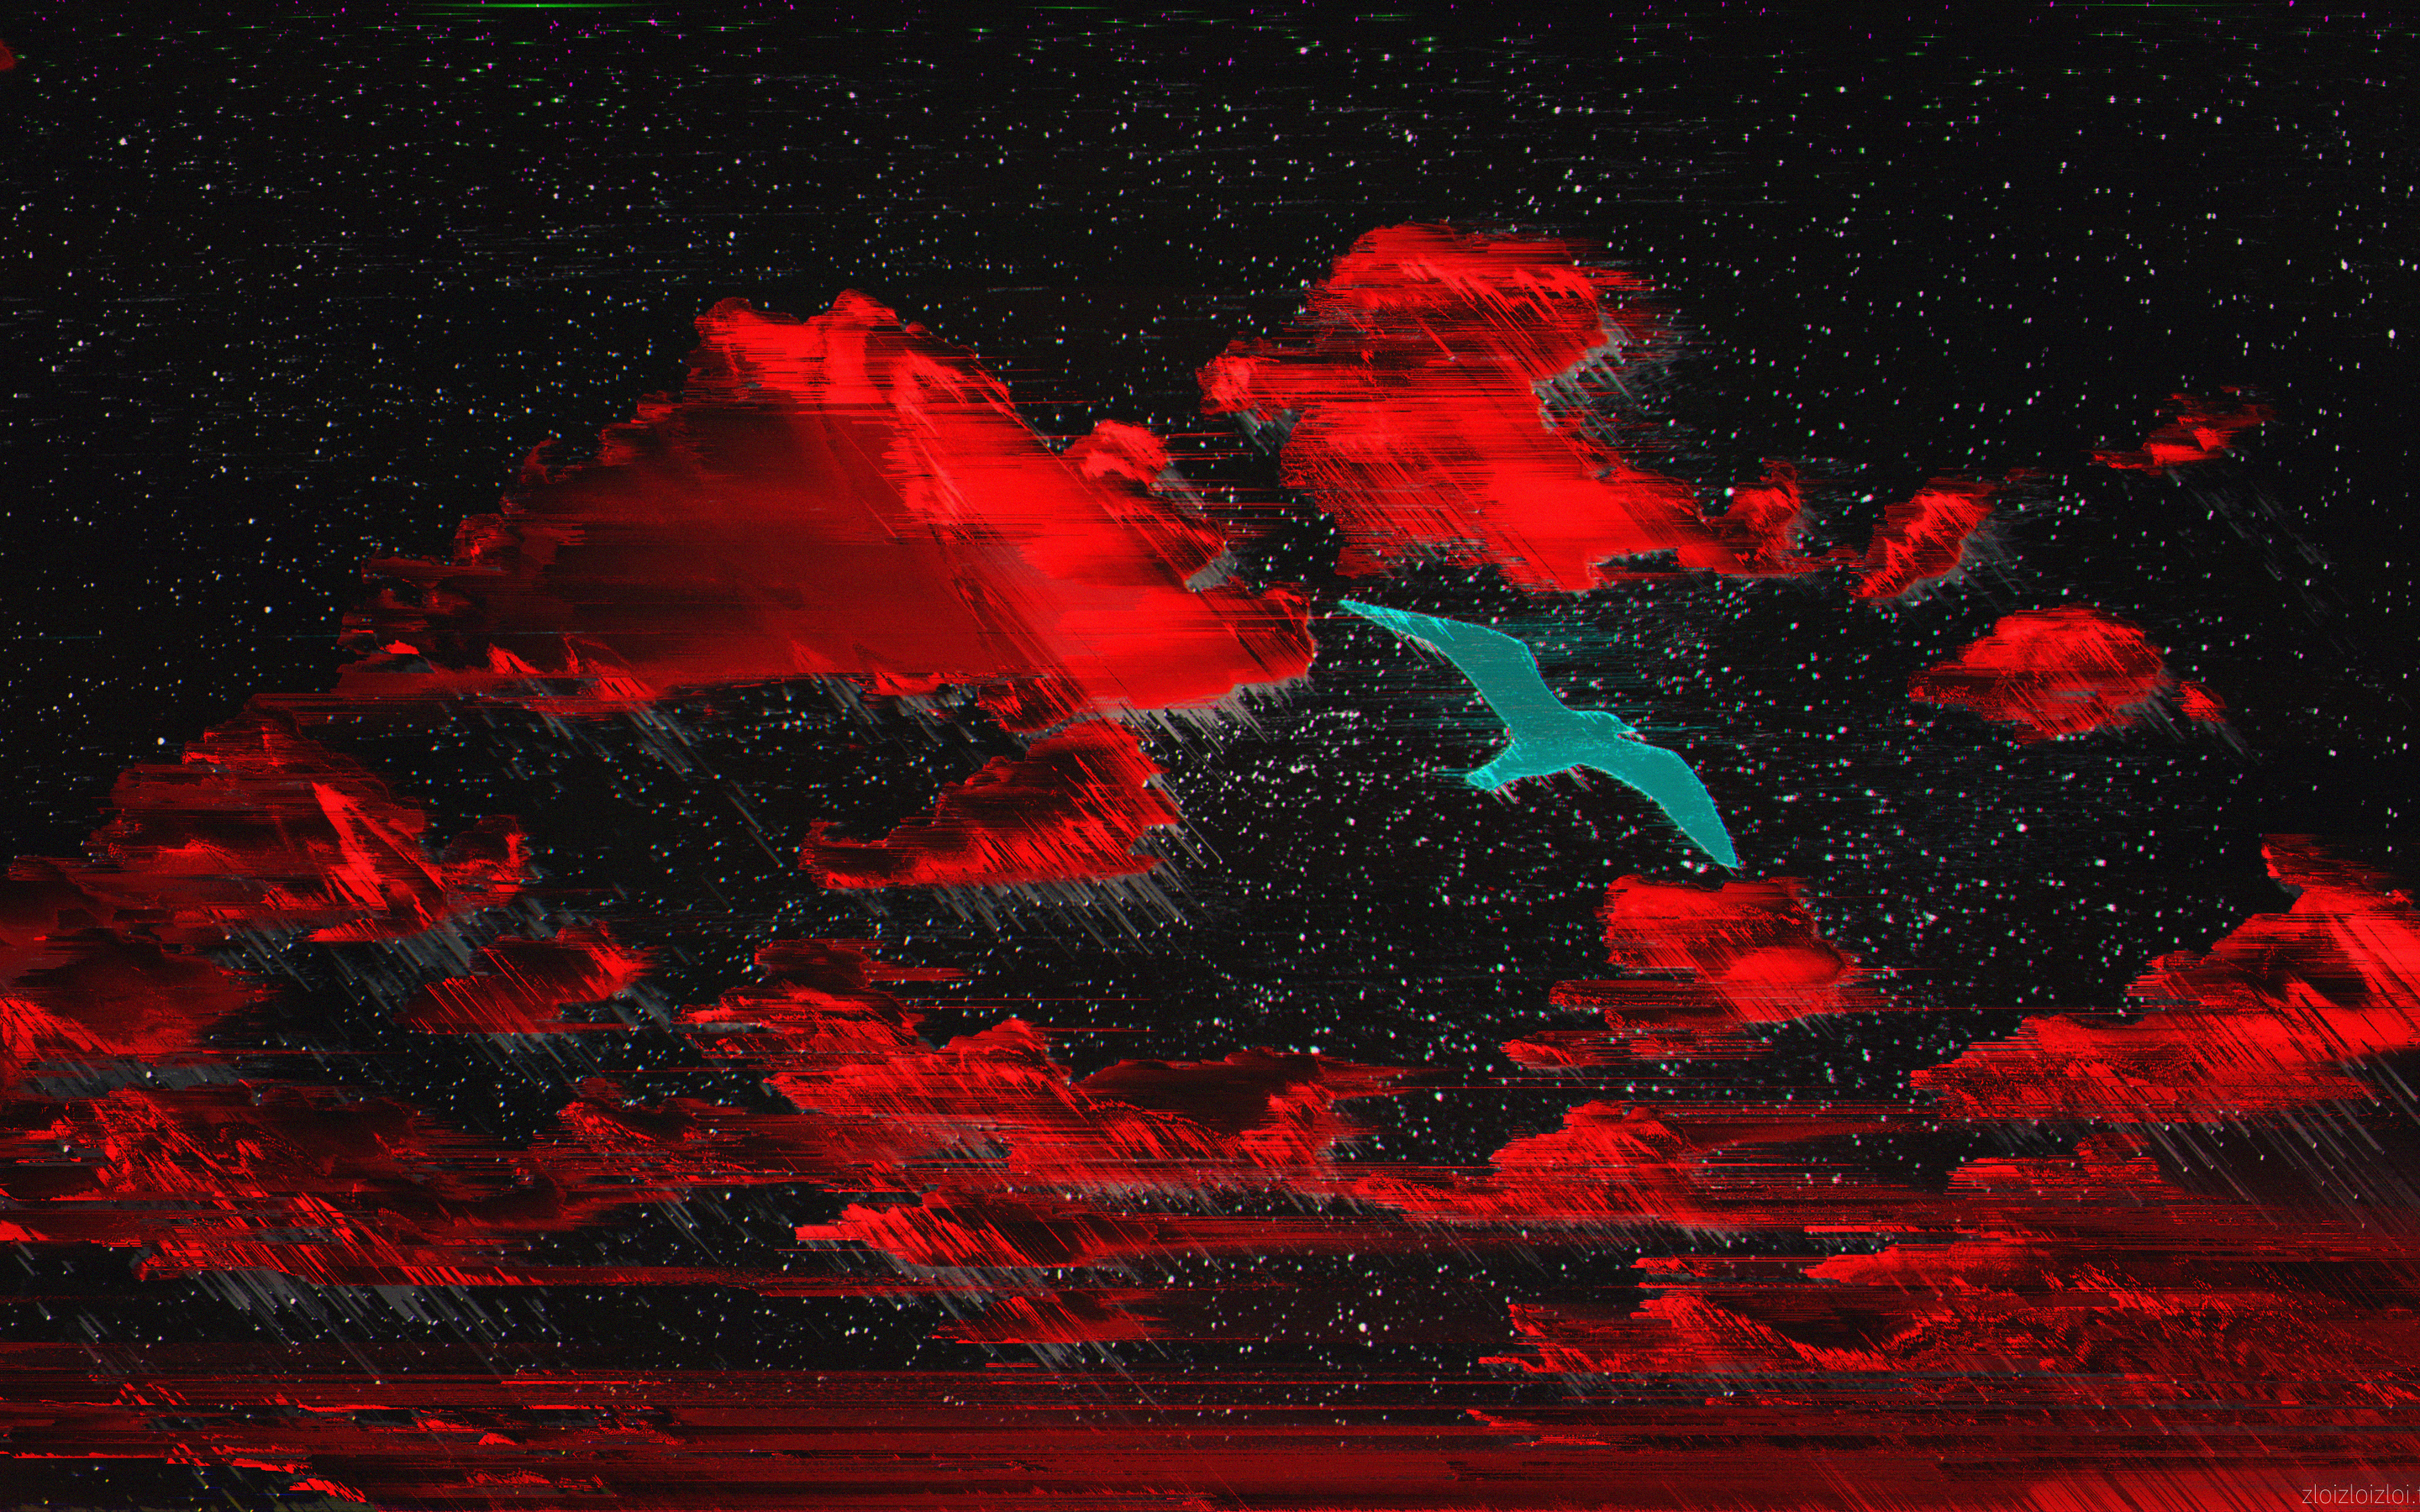 A bird flying in the sky with clouds - Glitch